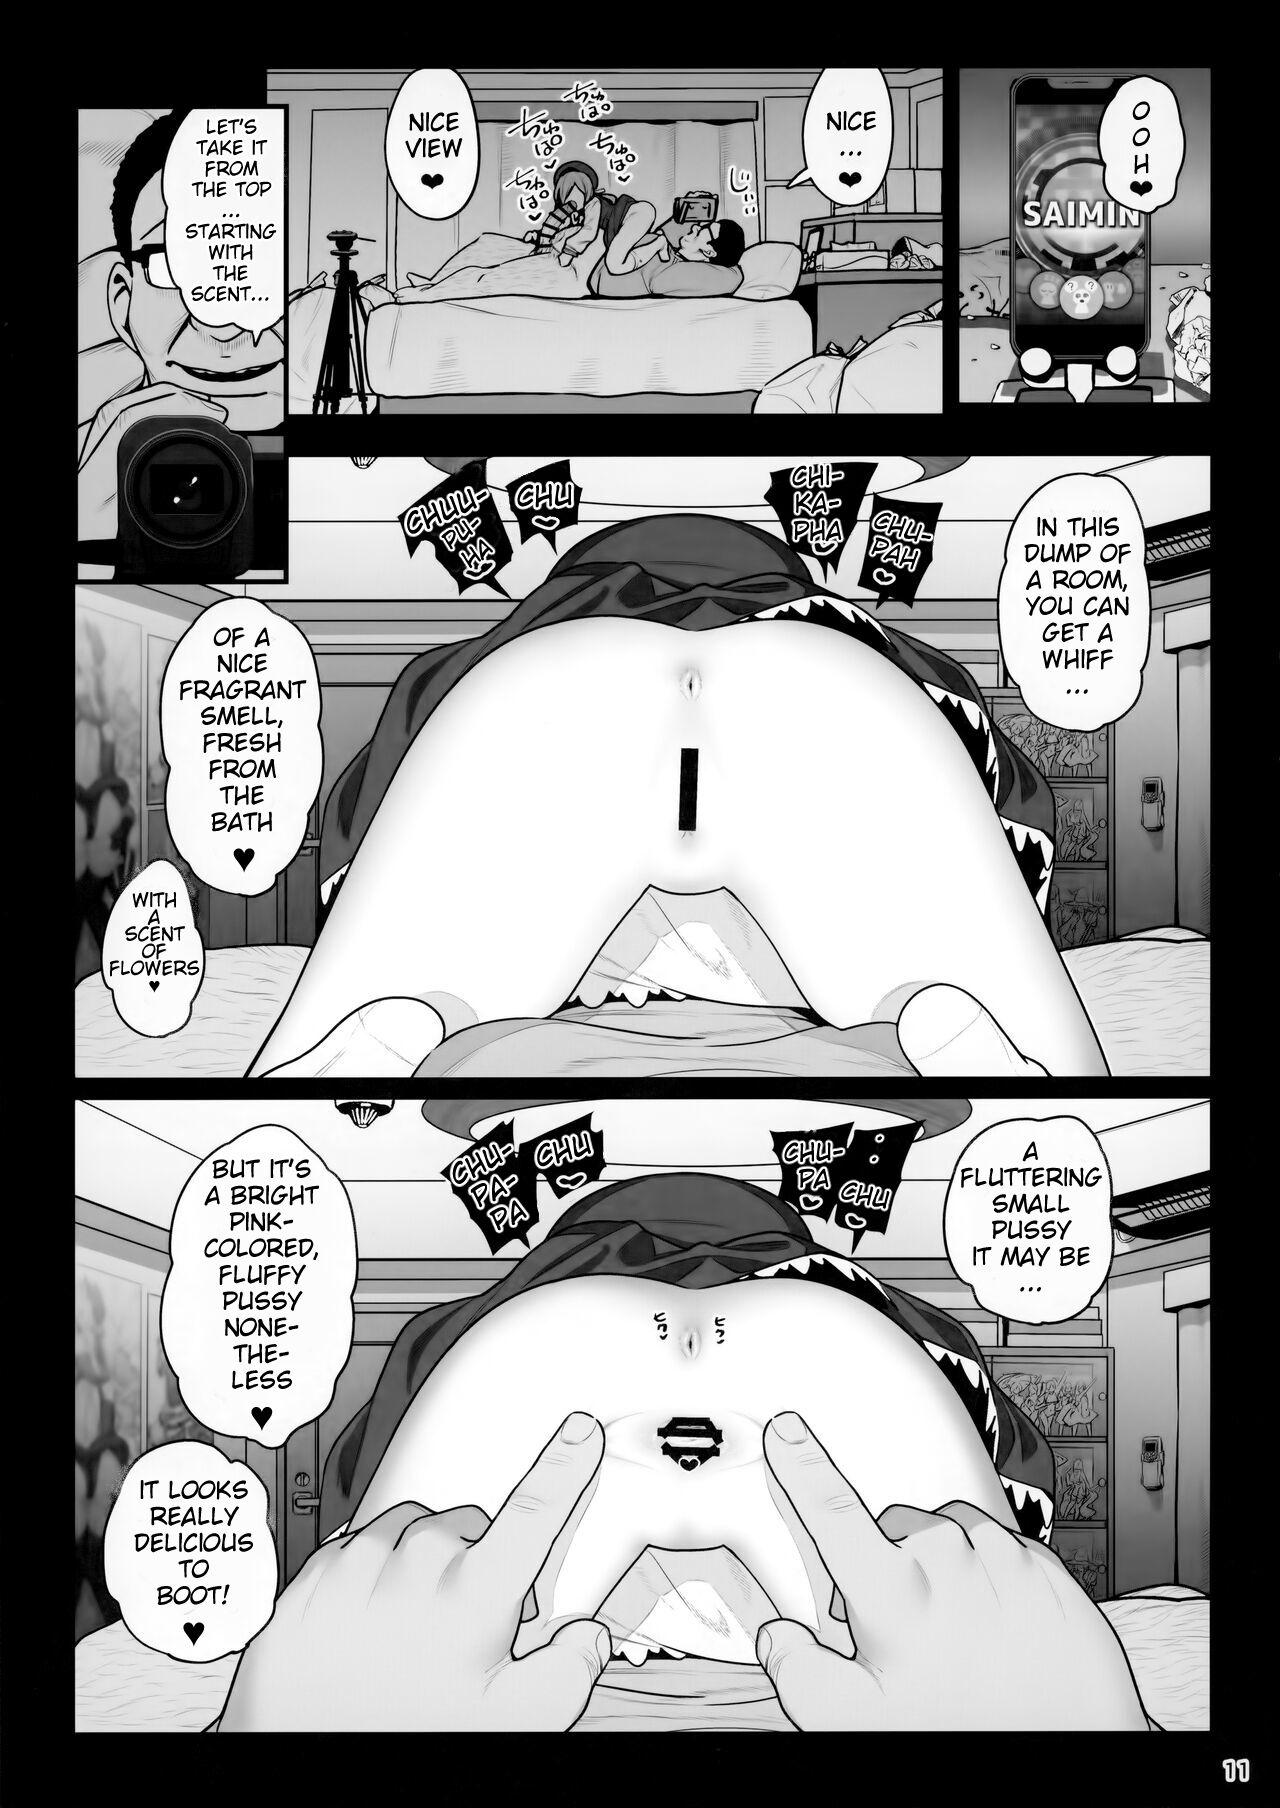 Real Amatuer Porn To my Neighbor, your Daughter has been too cute, admirable, and smart to boot, she's fitting as my Onahole so I did it - Mating Hypnosis - Original Best Blowjob - Page 12